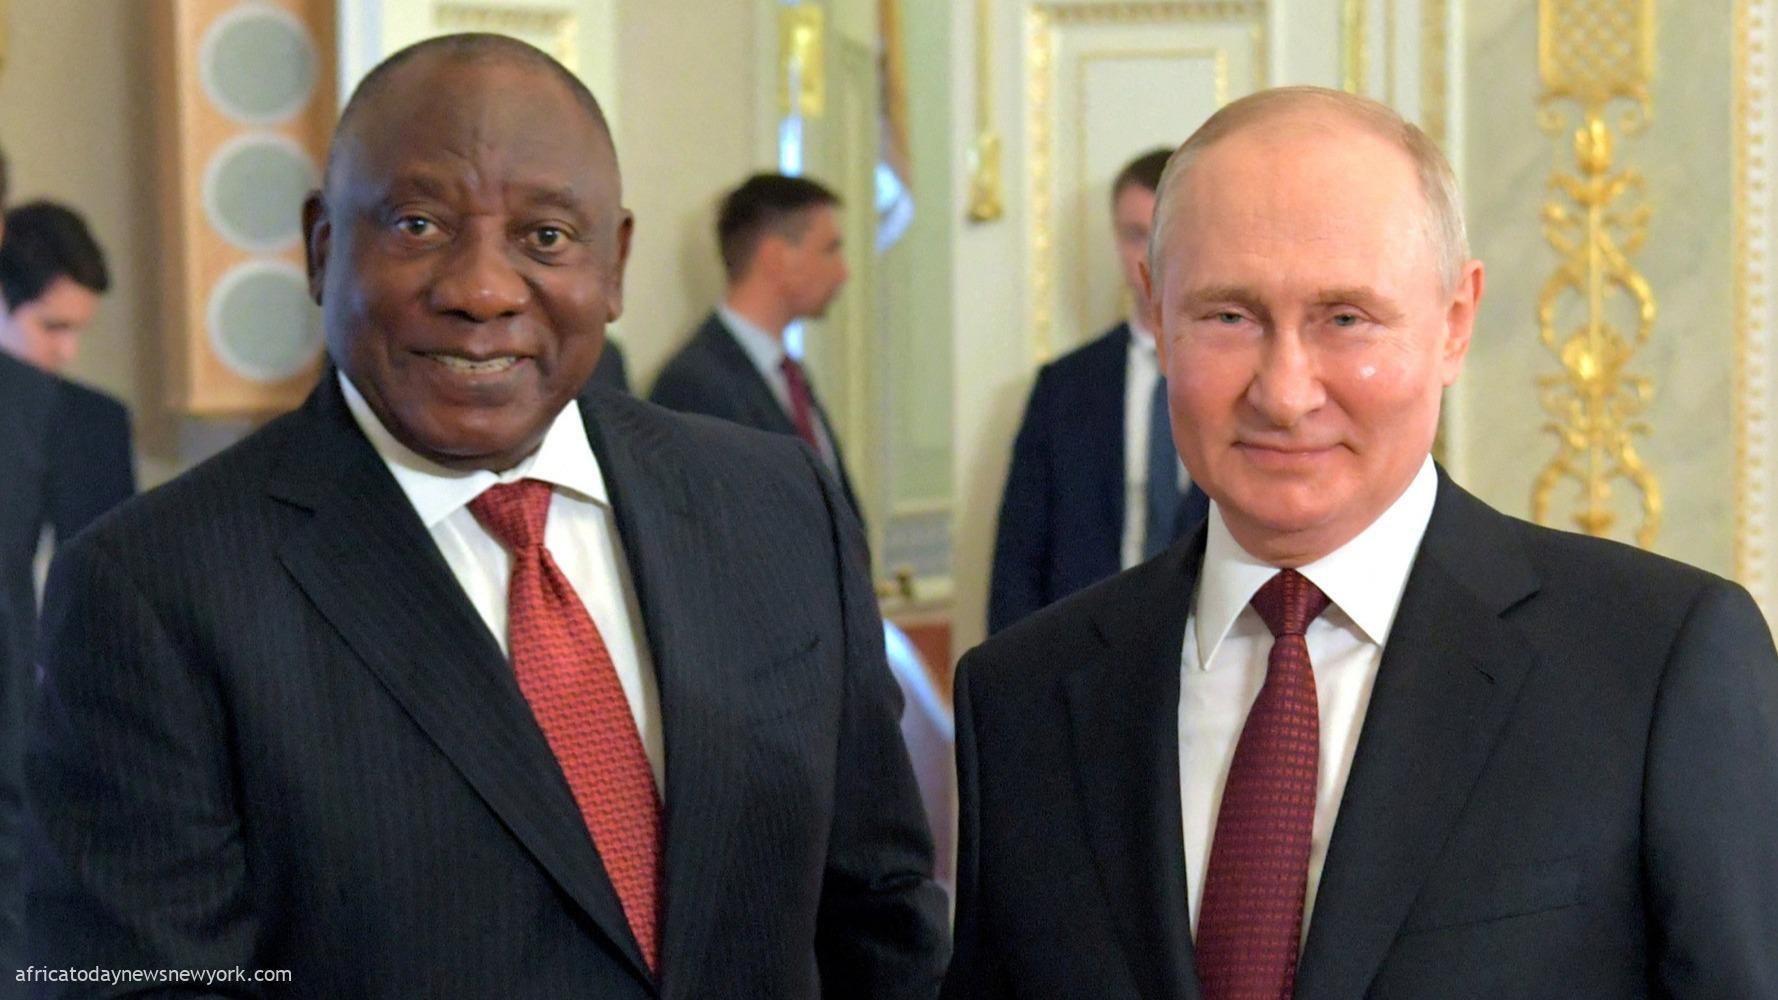 Arresting Putin Would Be ‘Declaration Of War’ - South Africa